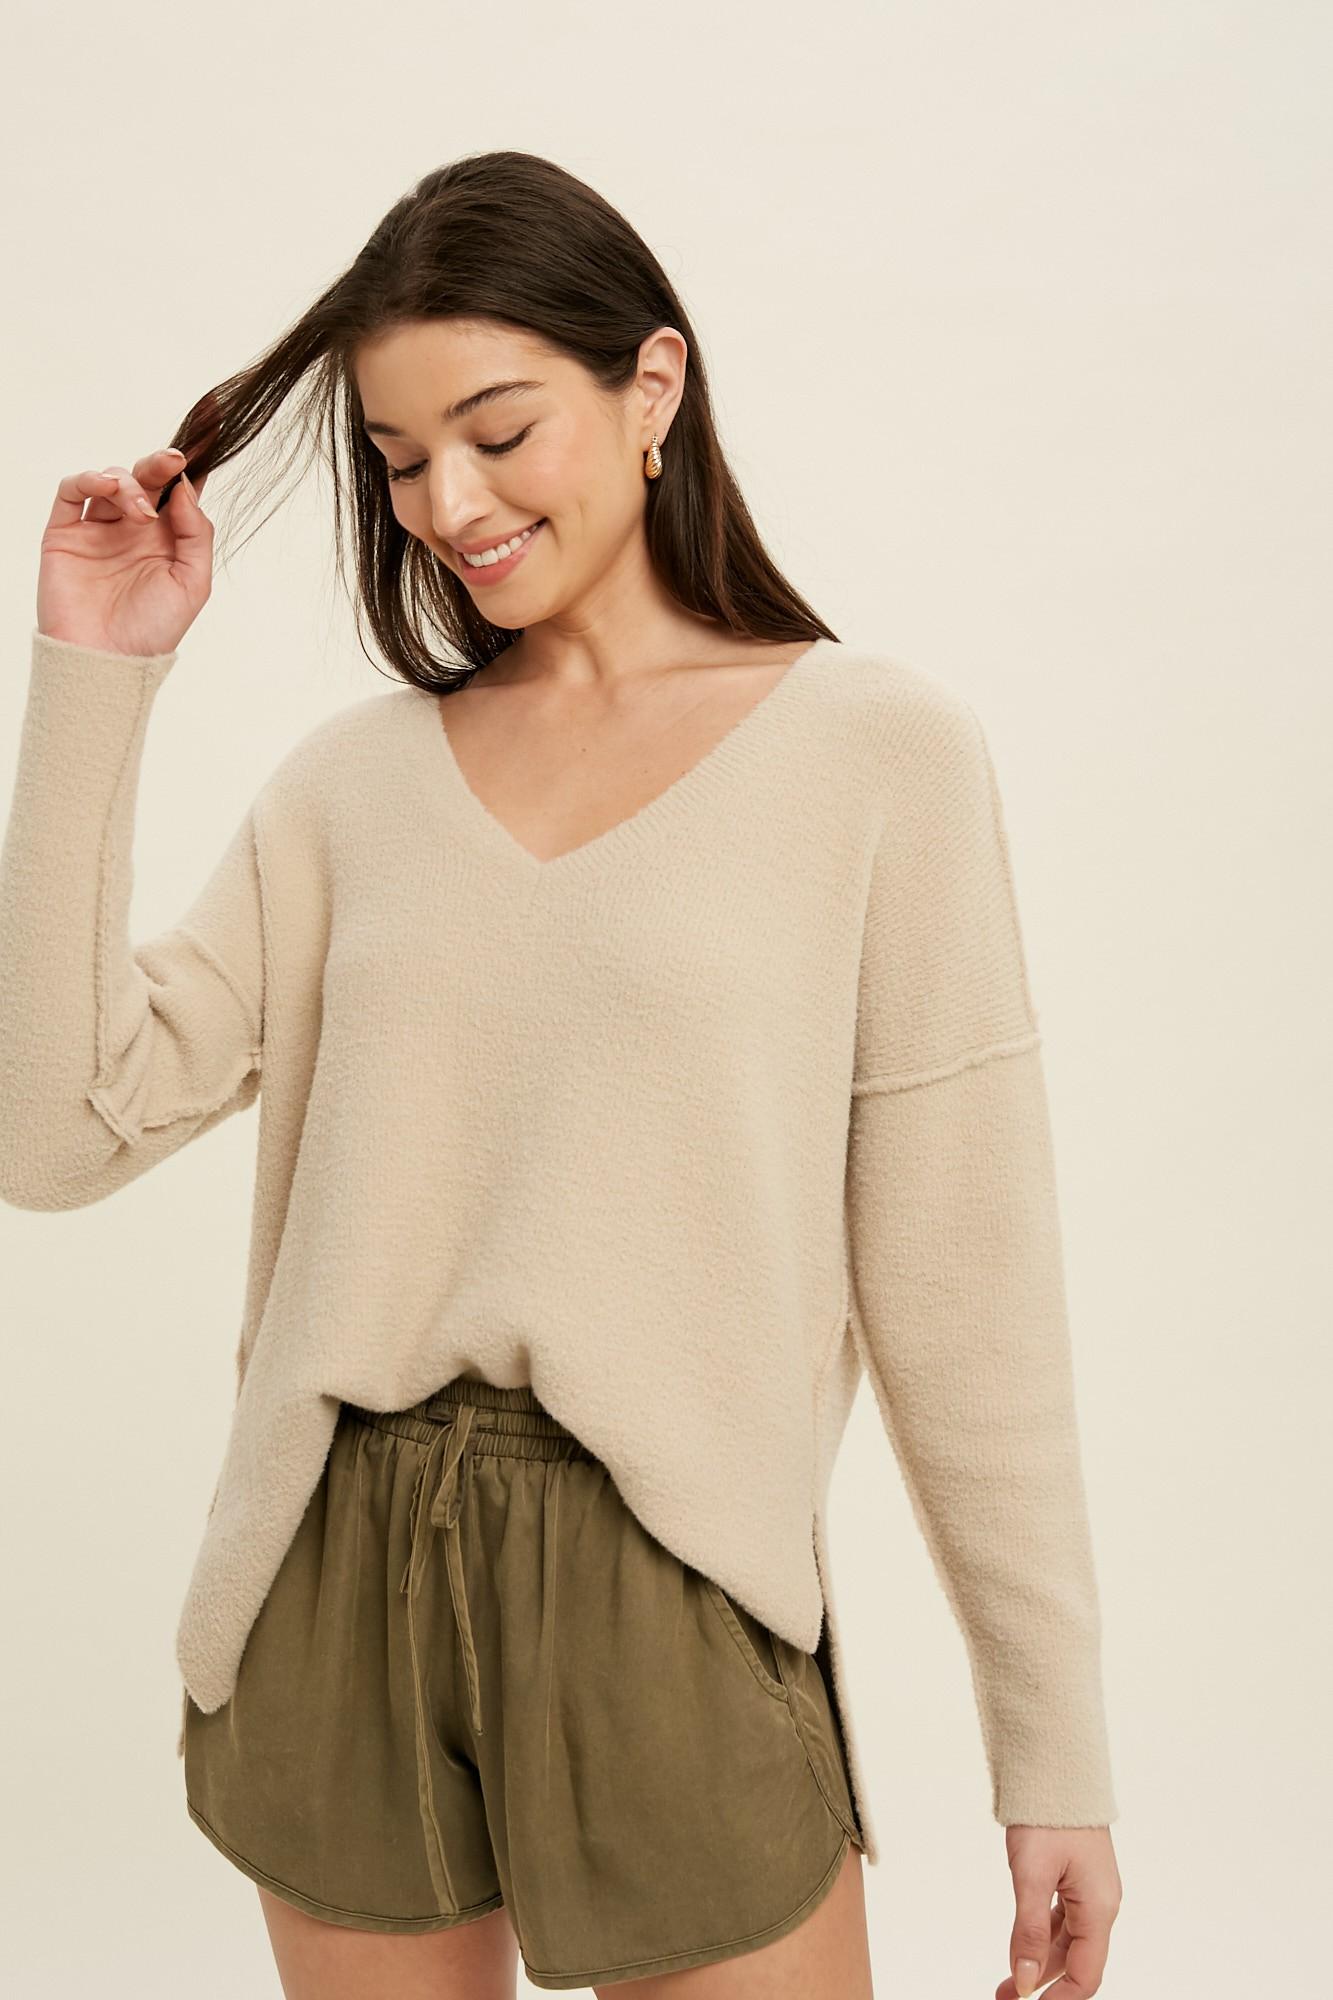 Knowing You V Neck Knit Sweater